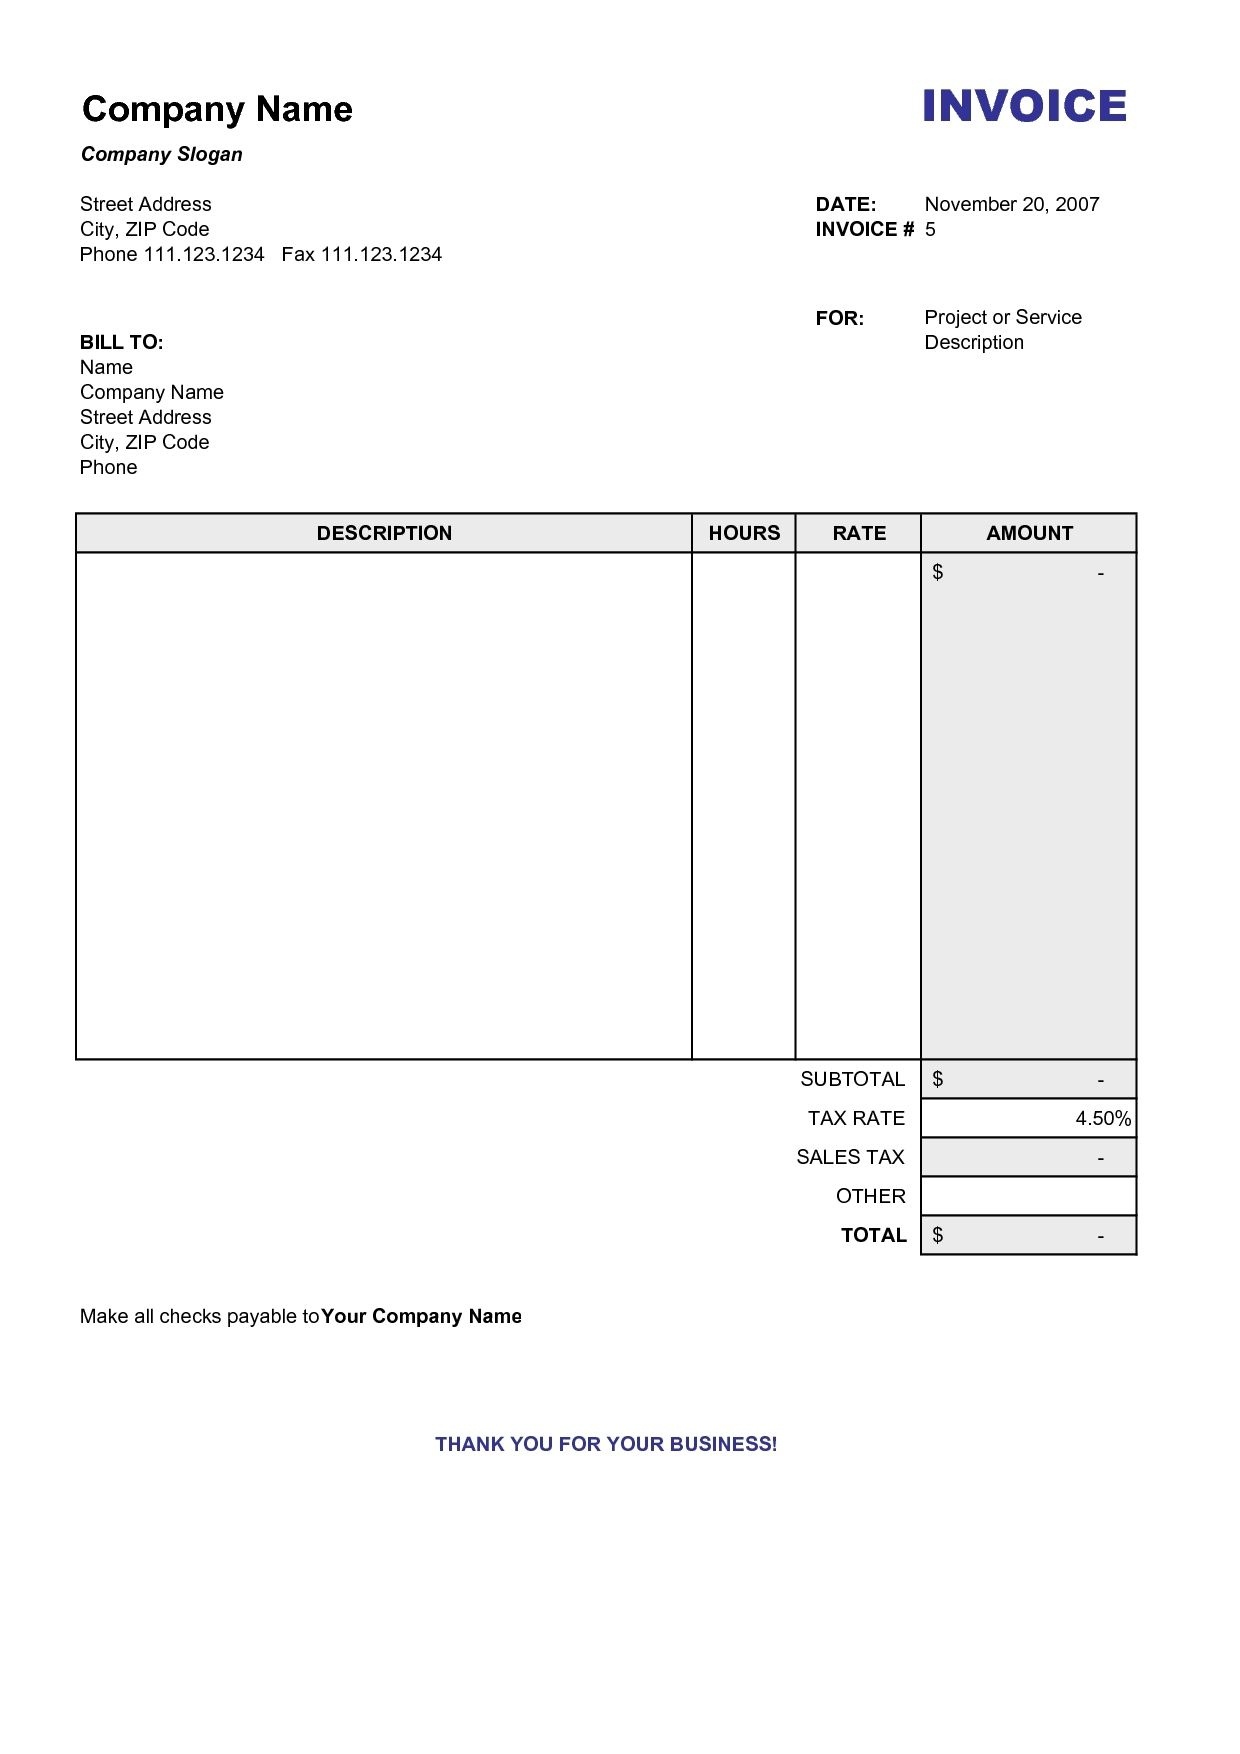 Copy Of A Blank Invoice Invoice Template Free 2016 Copy Of Blank - Free Bill Invoice Template Printable